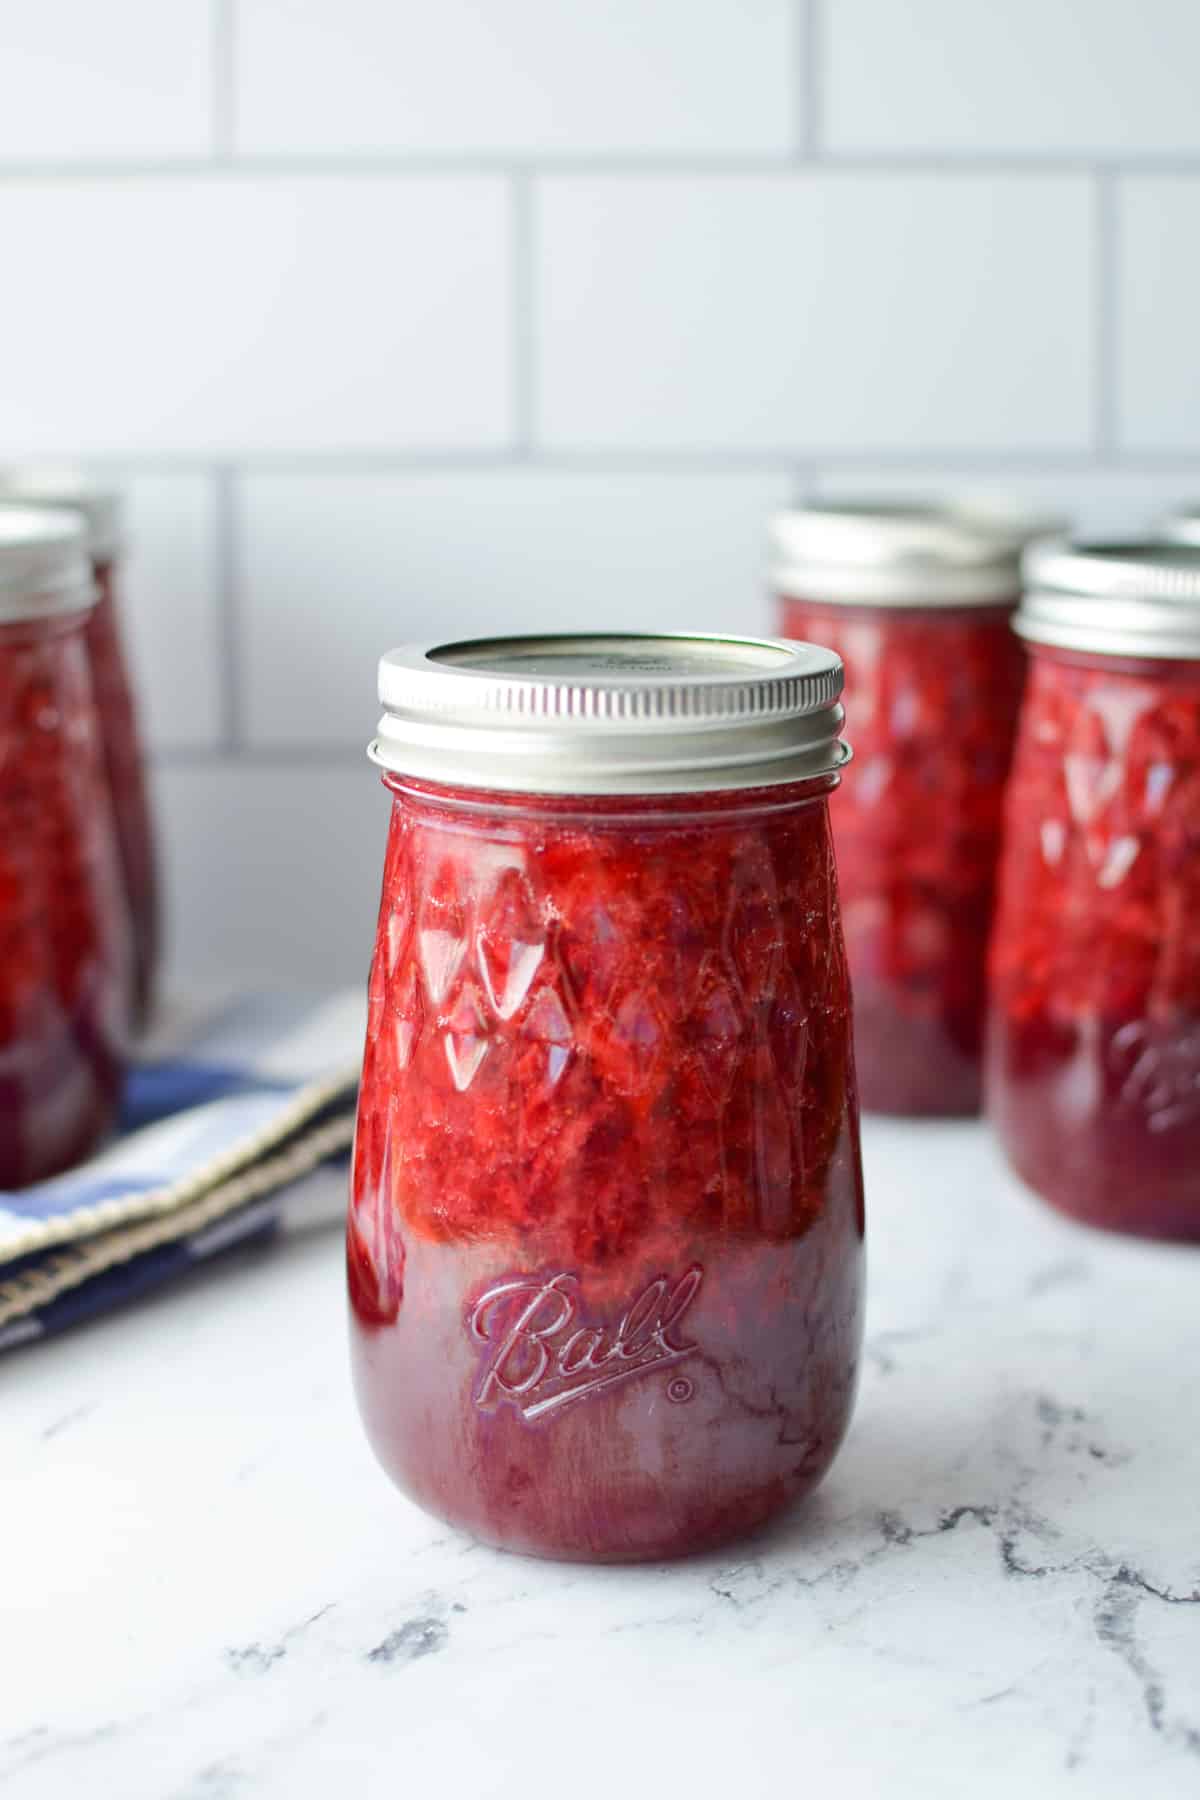 Several jars of strawberry jam on a white marble surface.